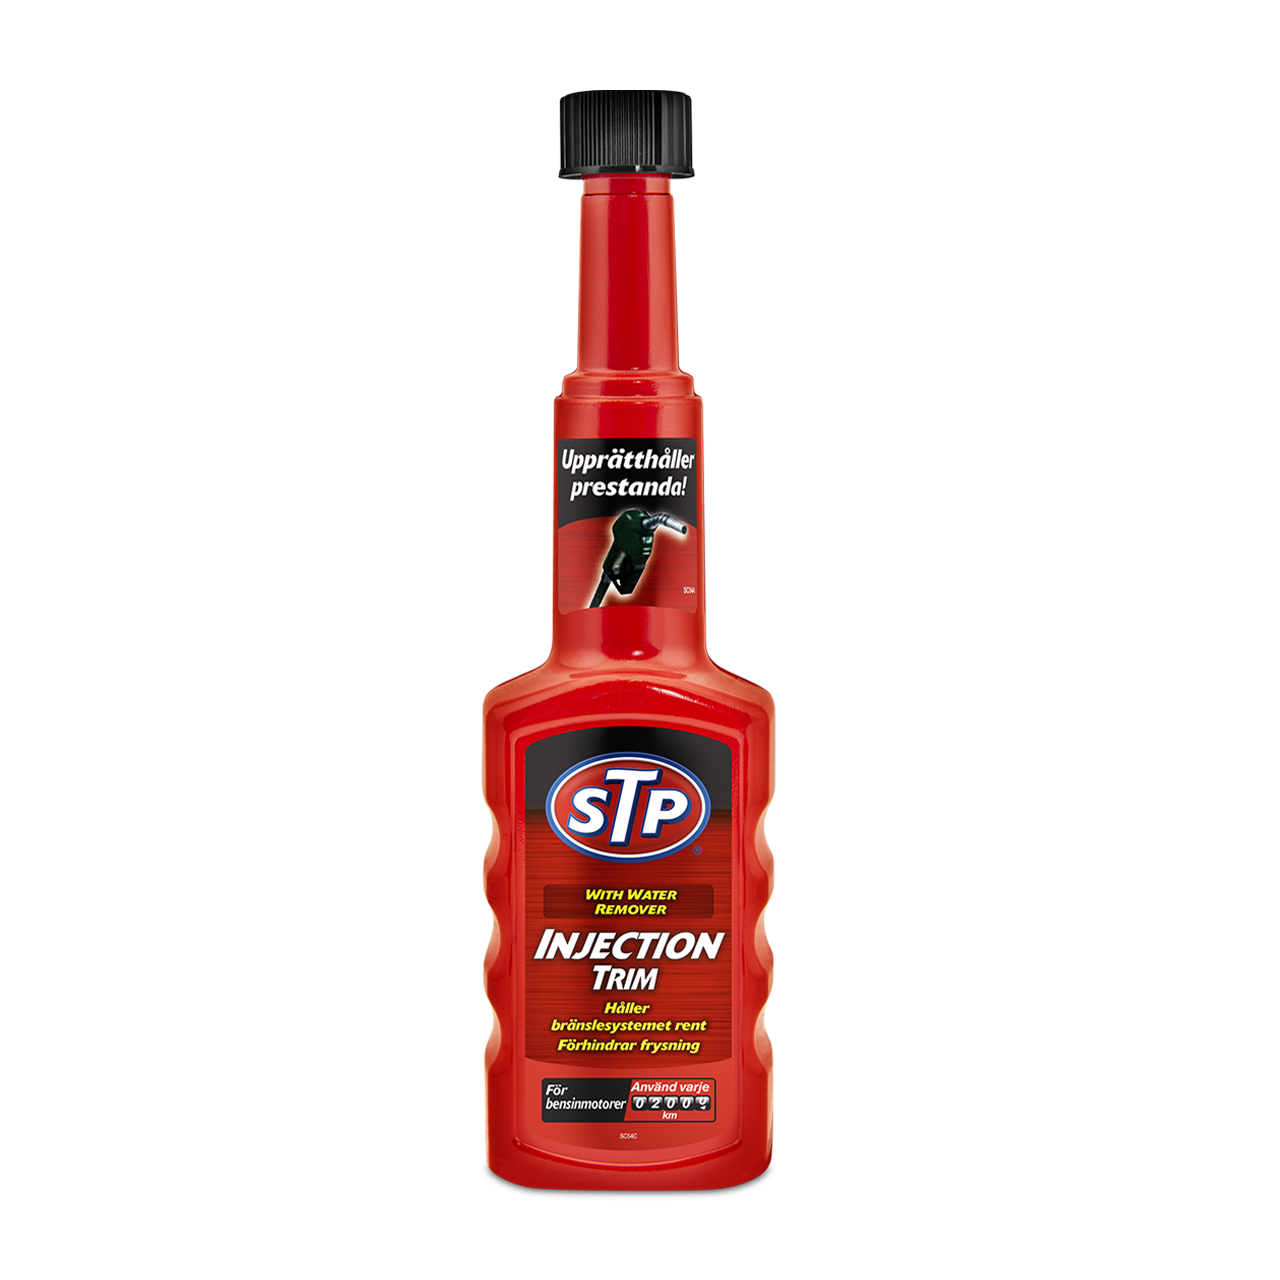 STP Injection Trim Fuel System Cleaner 200ml - Dirt cheap price!